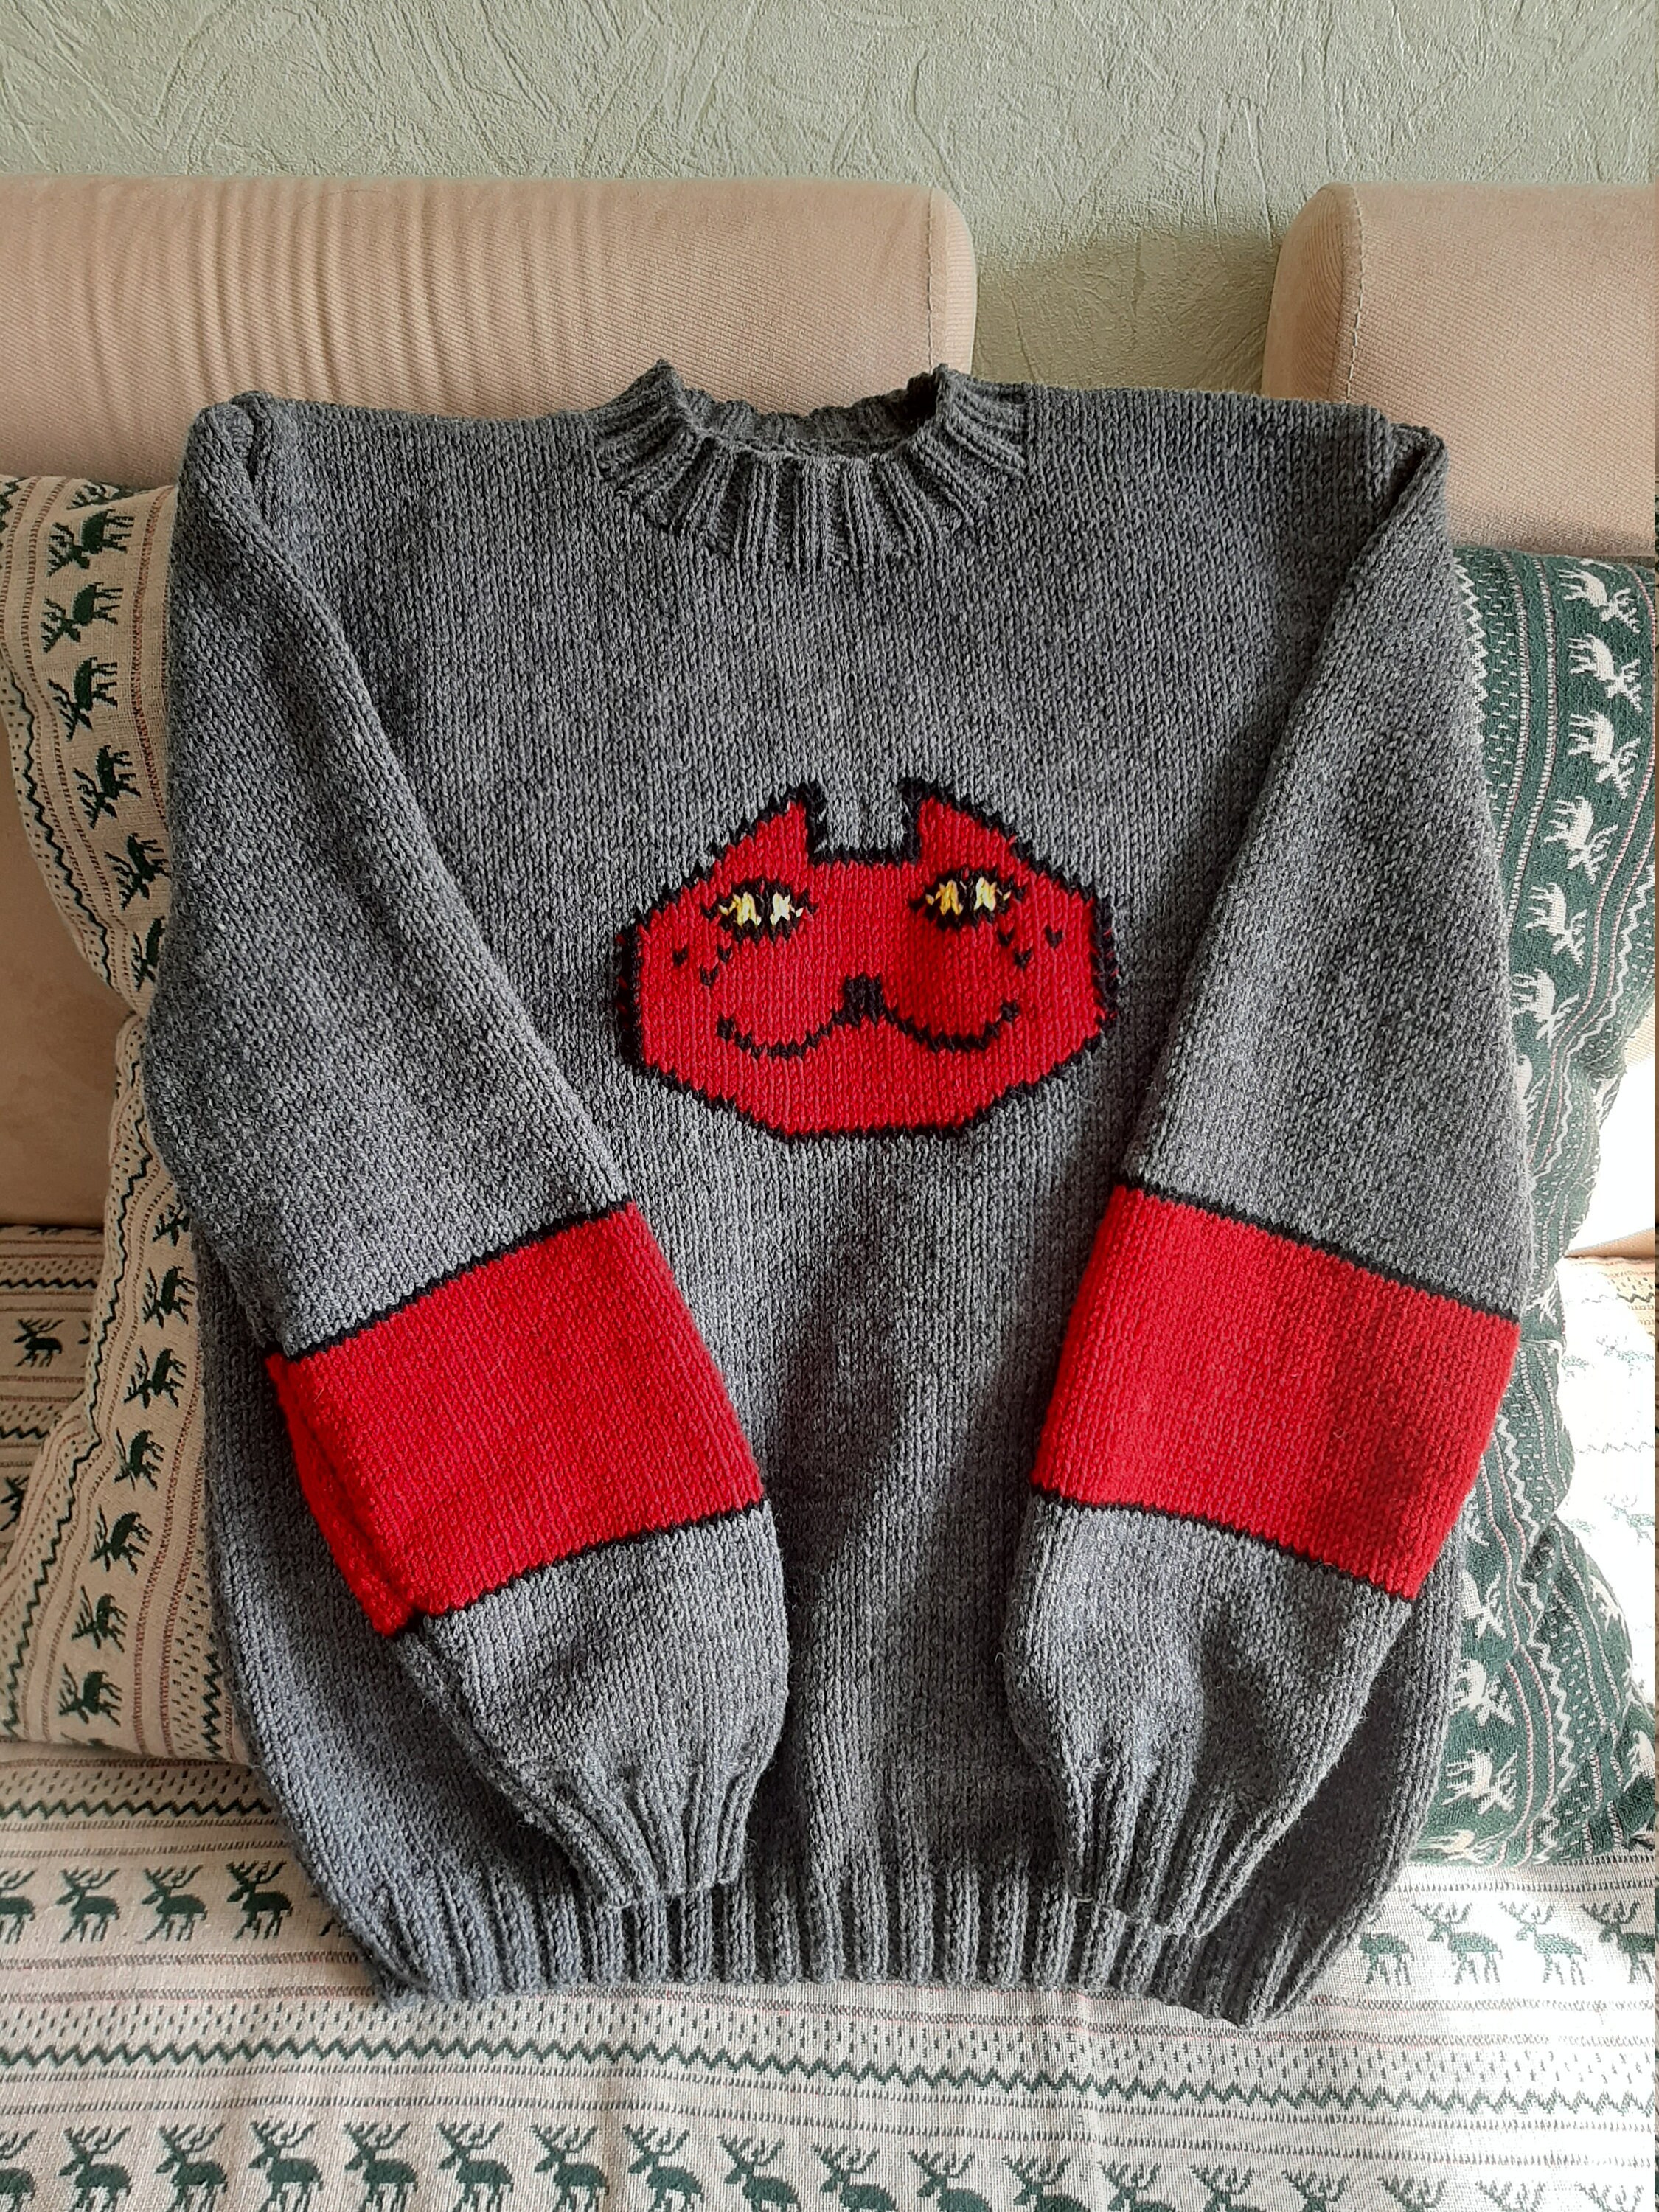 Band Merch sweater, custom knitted from 1pc